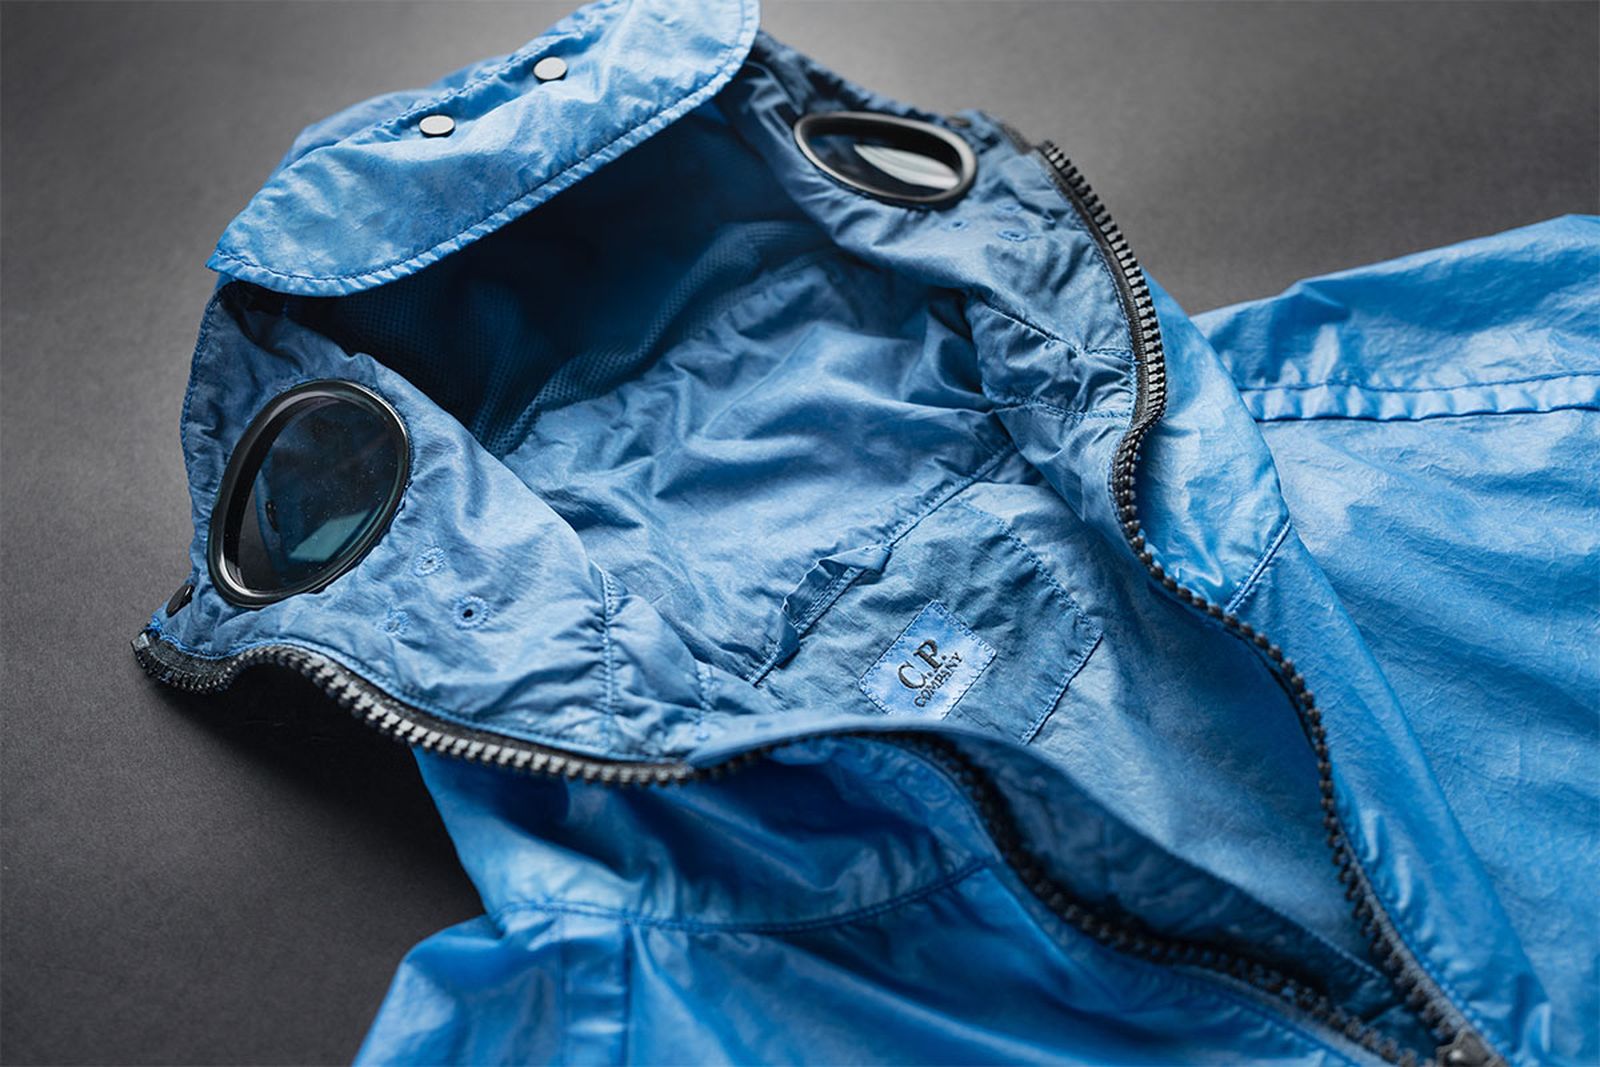 The NyBer Special Dyed Goggle Jacket in 'Riviera' blue.
